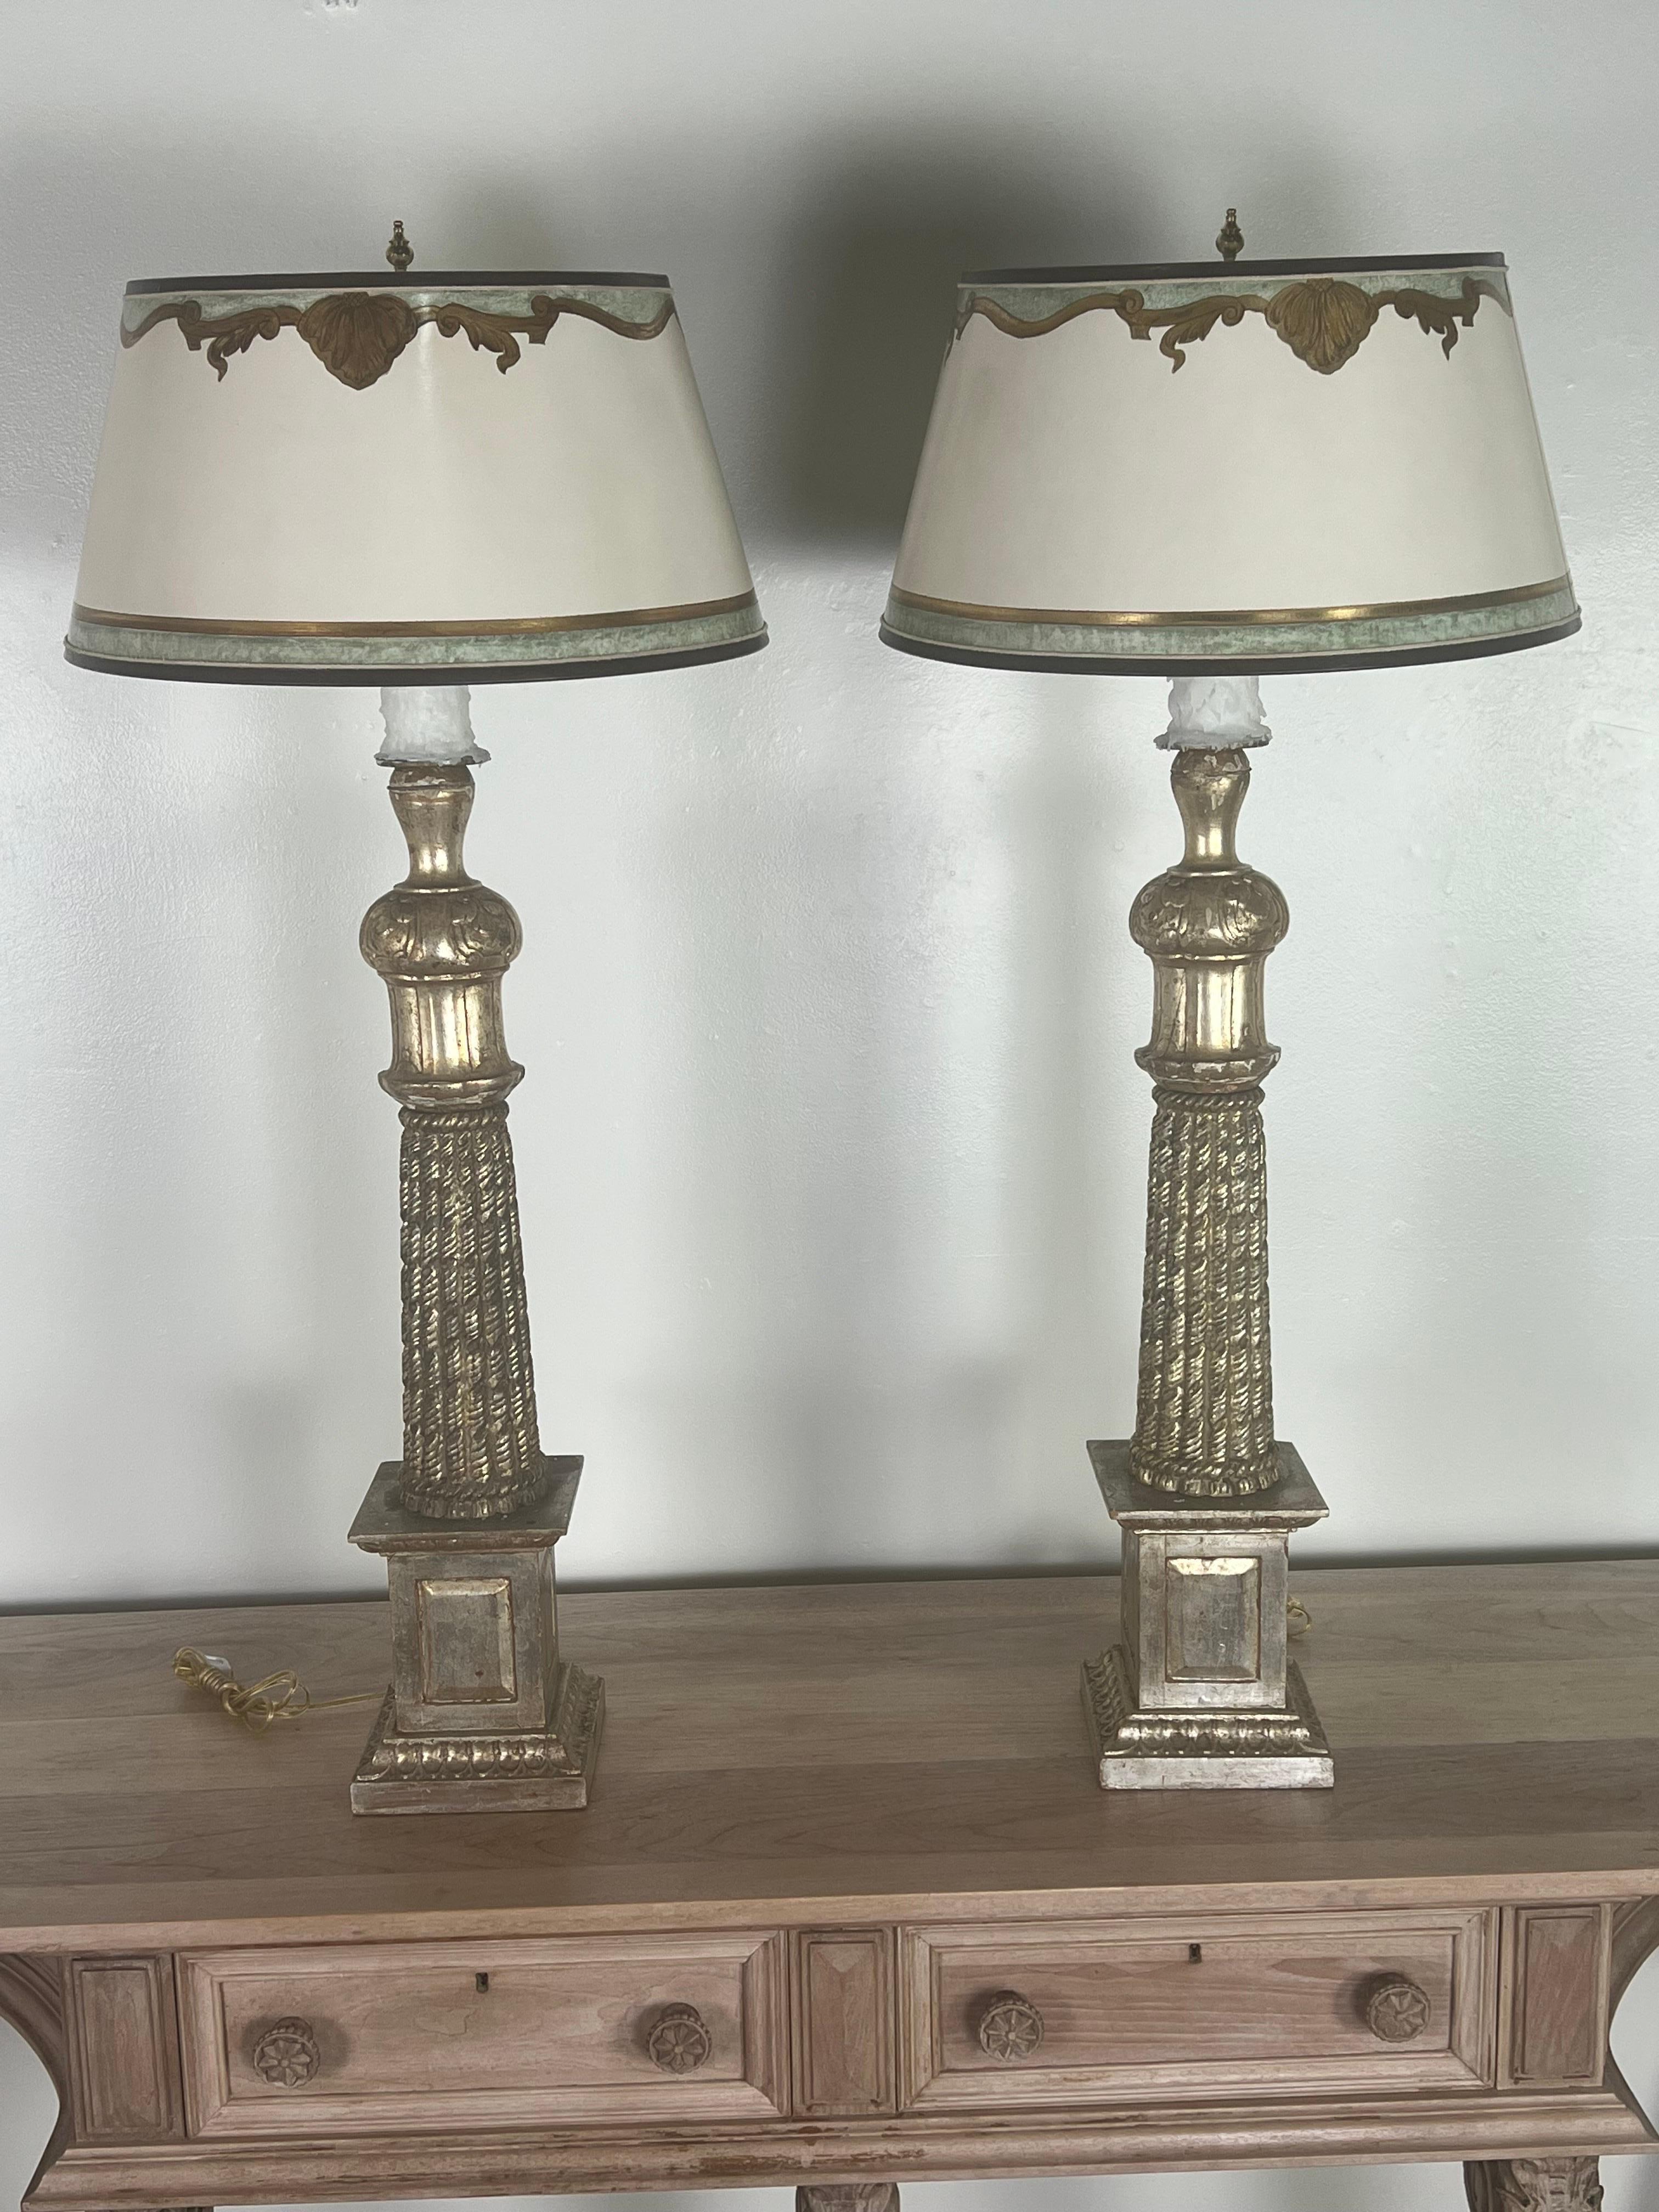 Pair of Monumental size beautifully carved Italian Neoclassical style silvered lamps. The lamps have custom hand painted parchment shades. The lamps are newly wired with drip wax candle covers. They are ready to use.